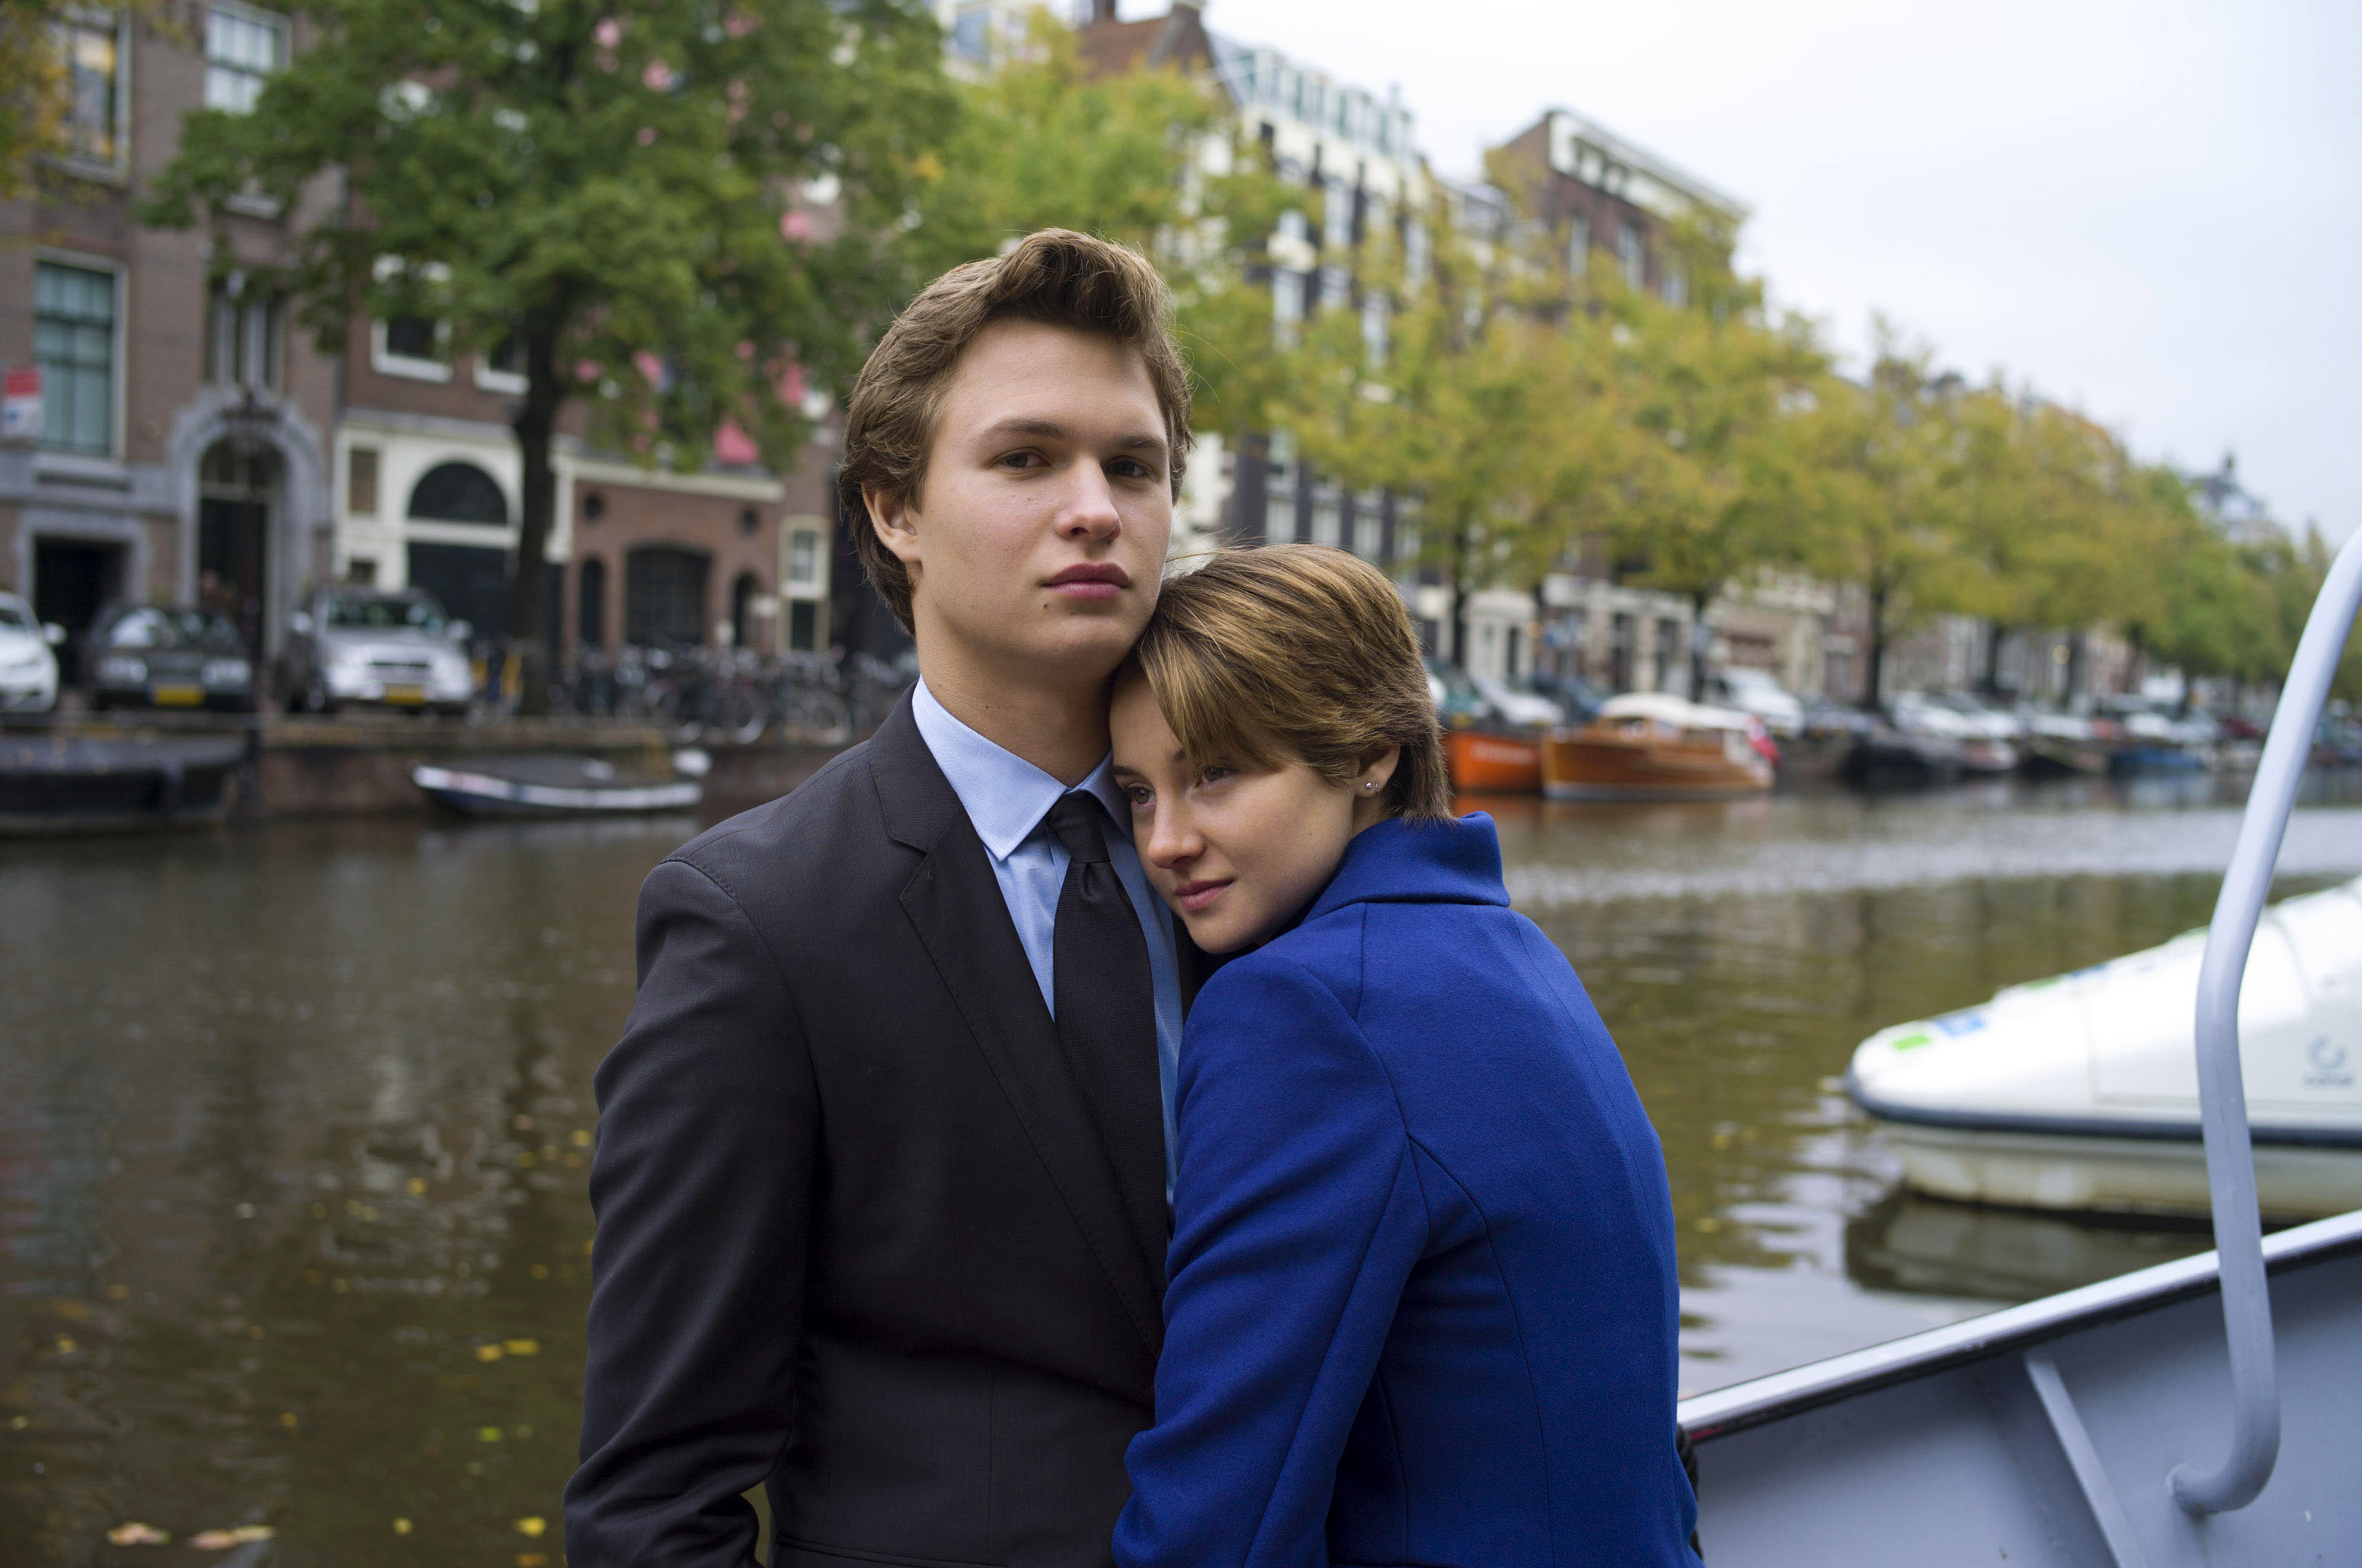 Ansel Elgort, left, and Shailene Woodley appear in a scene from "The Fault In Our Stars." (James Bridges—AP)